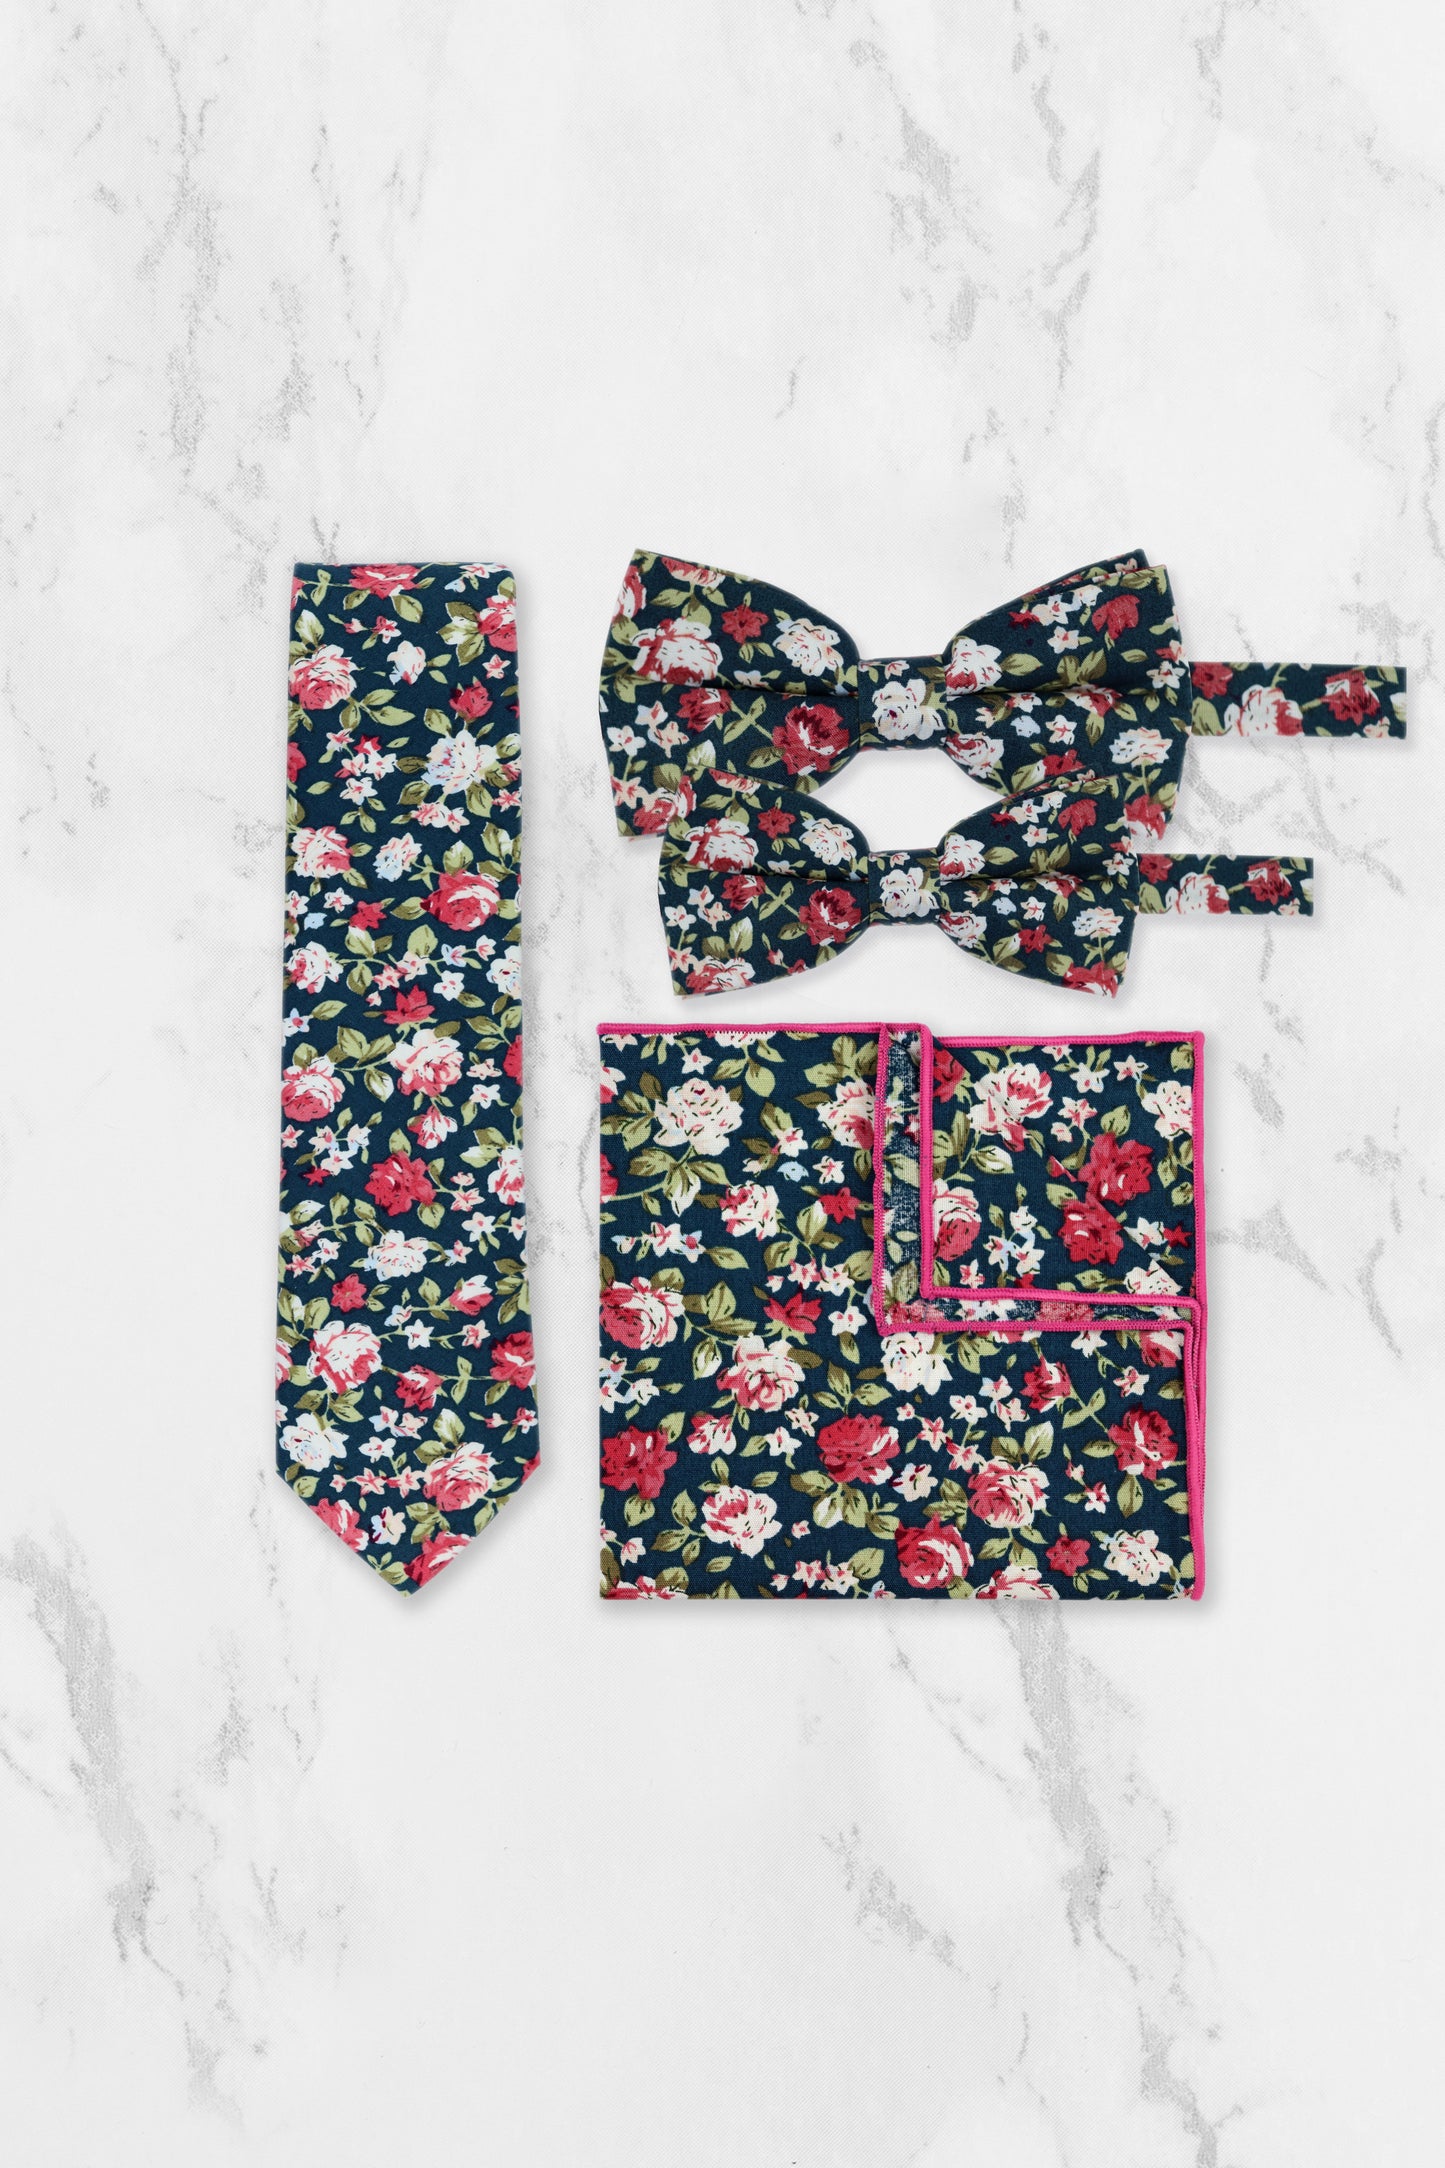 100% Cotton Floral Print Tie - Green & Pink